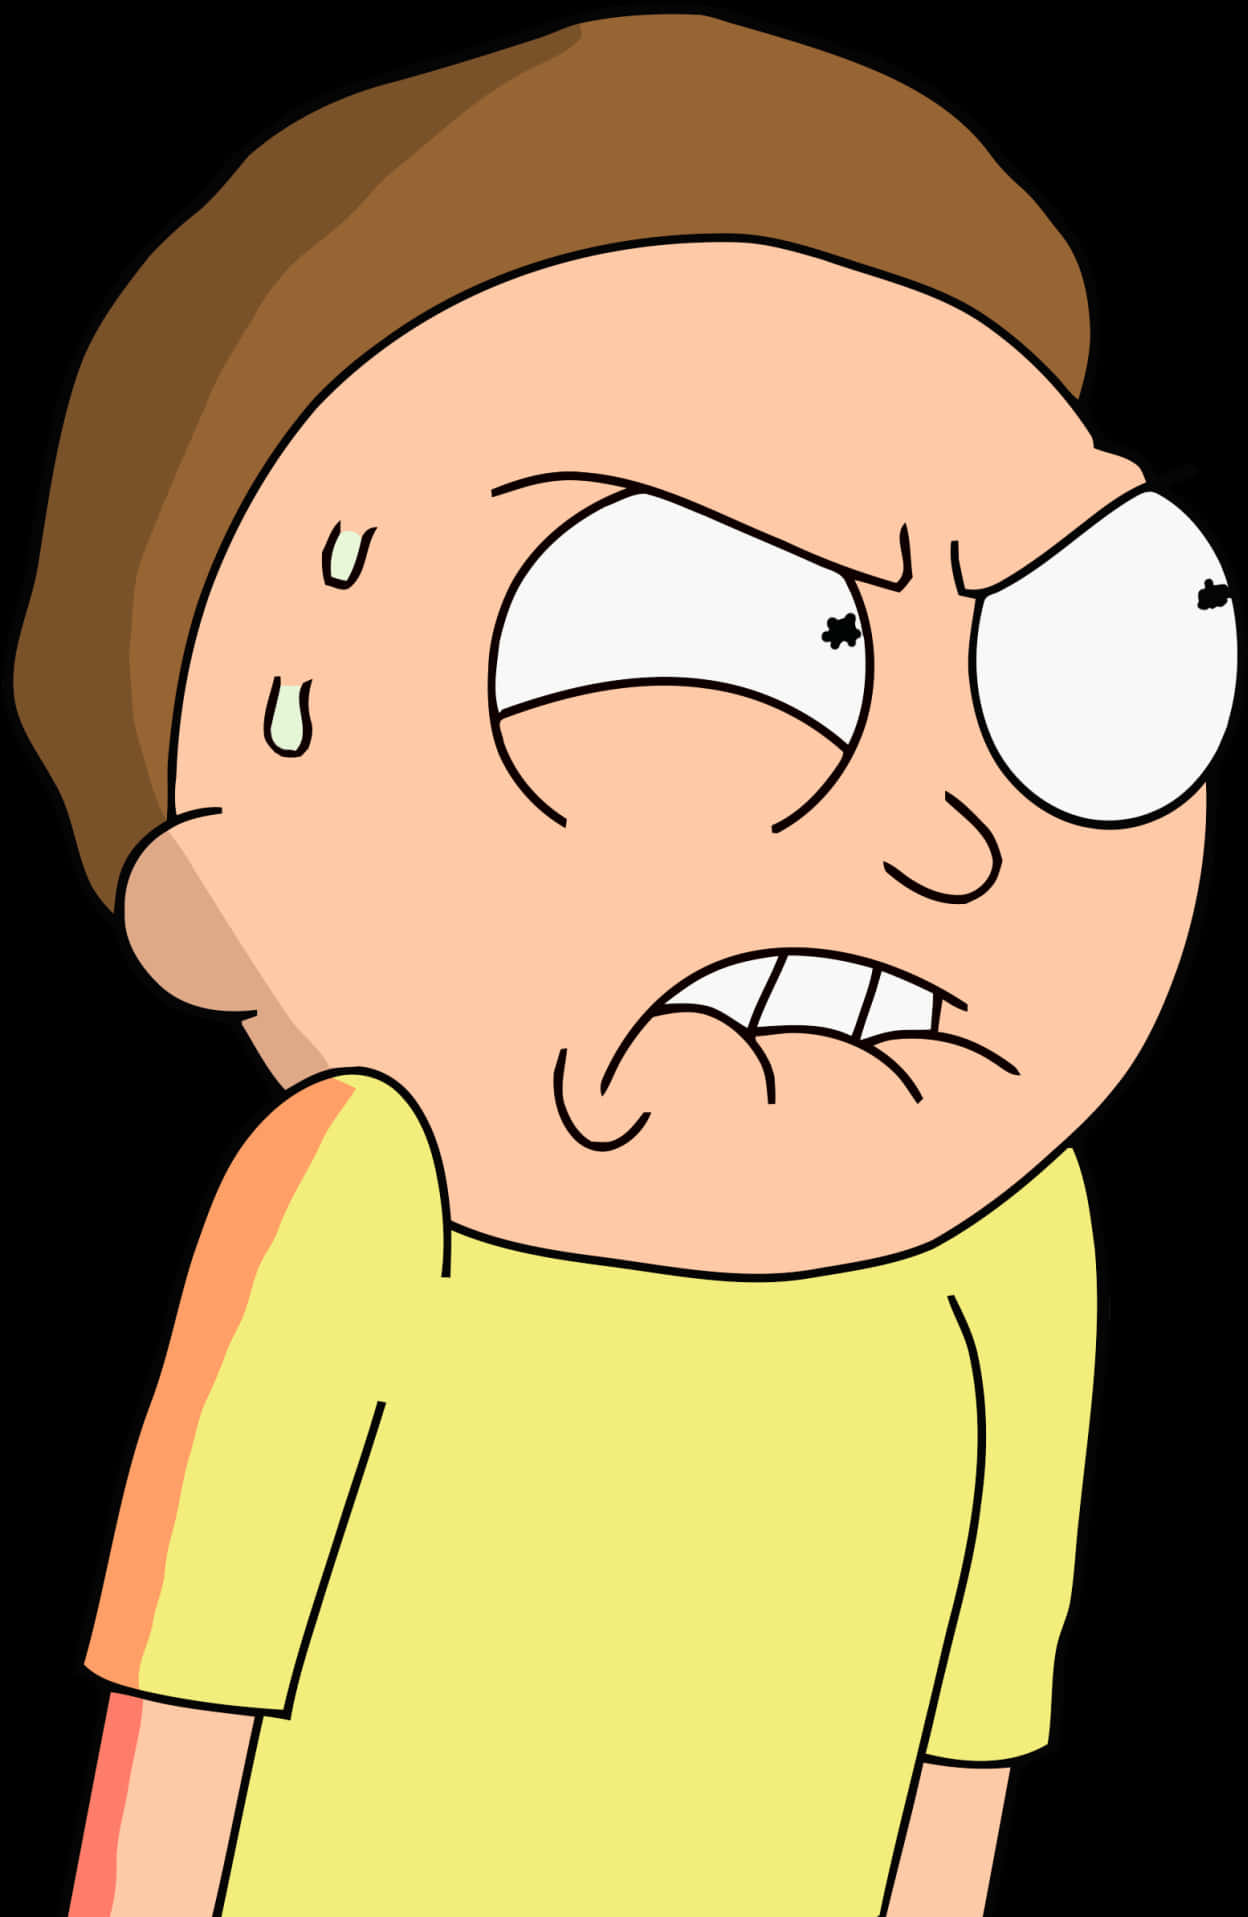 Morty Smith Annoyed Expression PNG